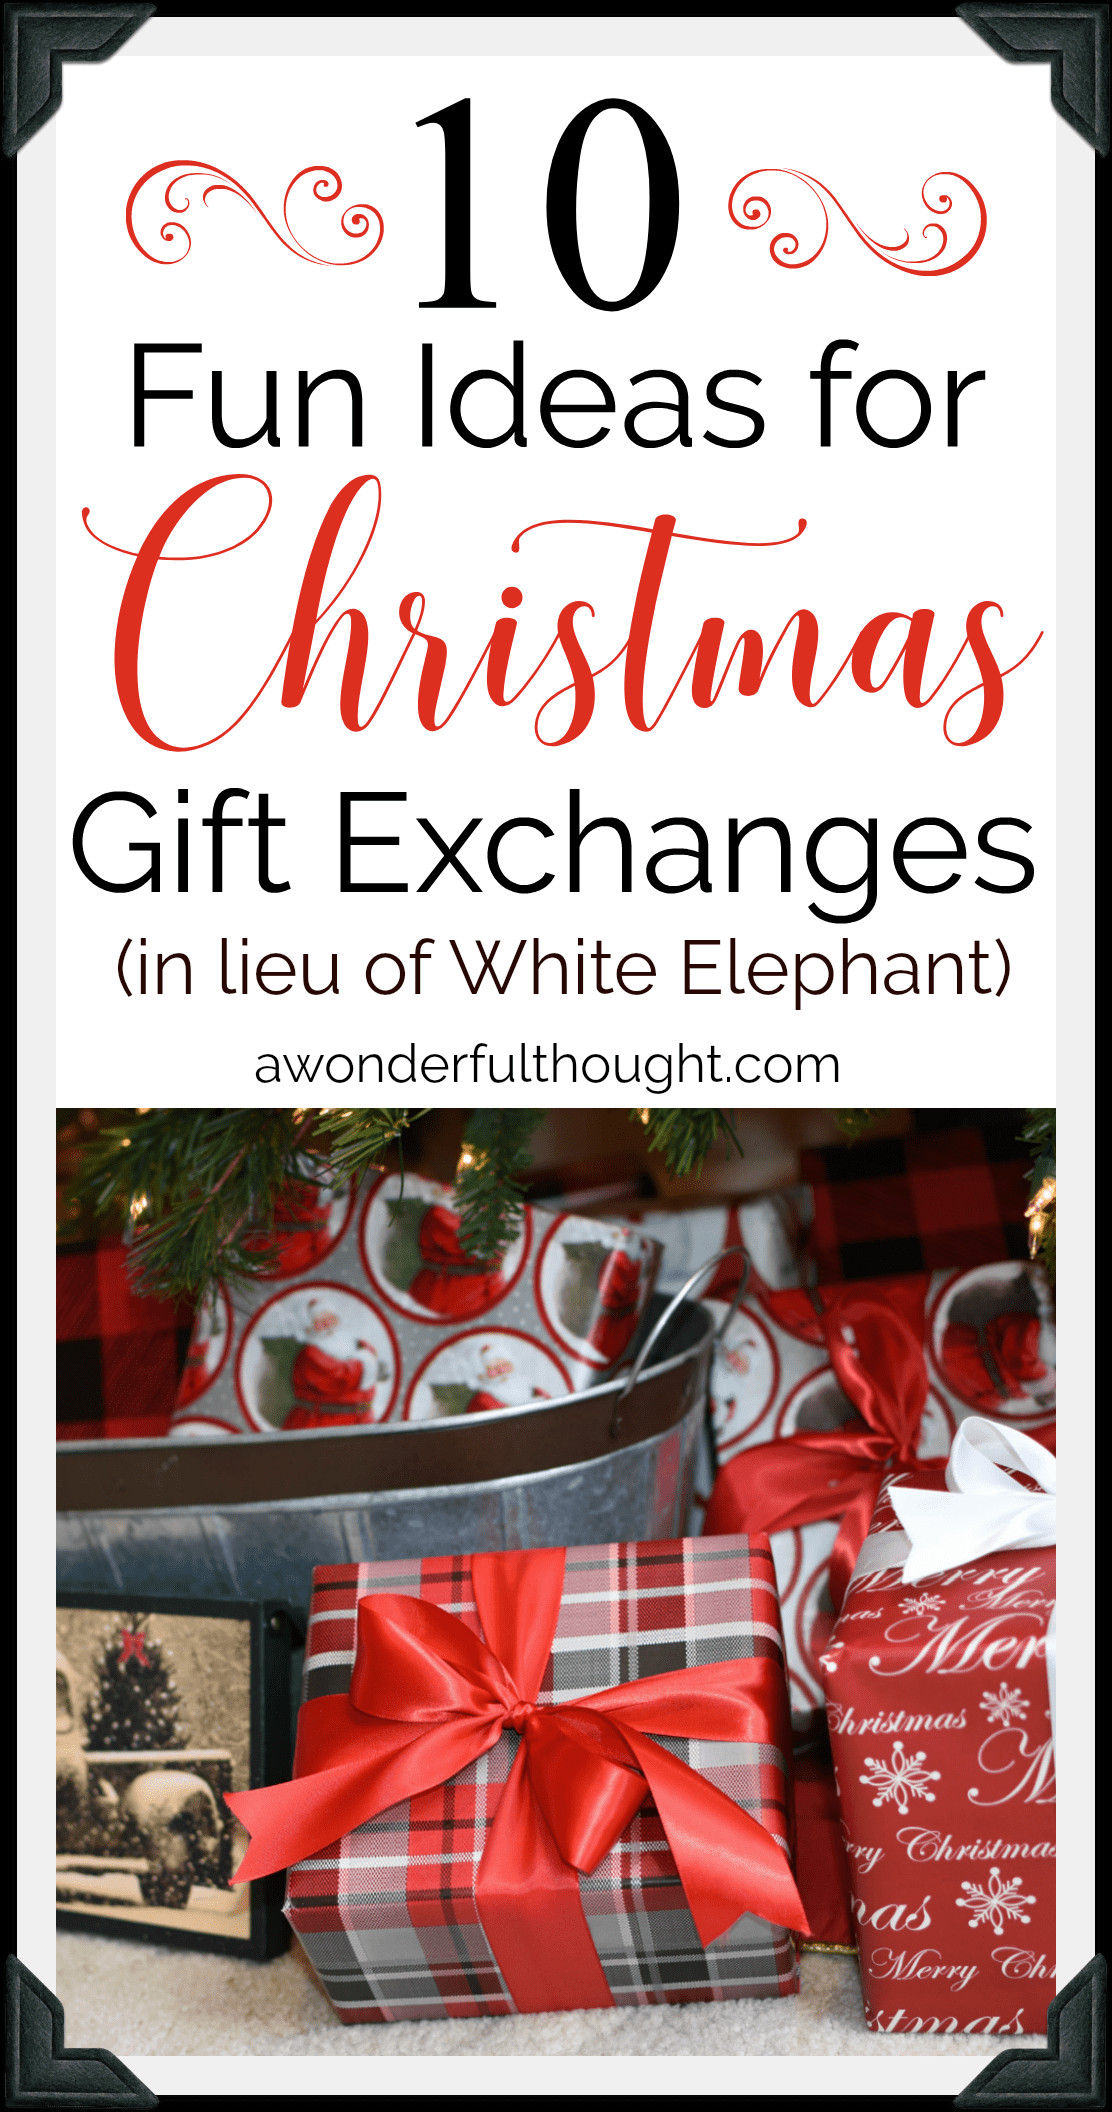 Fun Holiday Gift Exchange Ideas
 Christmas Gift Exchange Ideas A Wonderful Thought